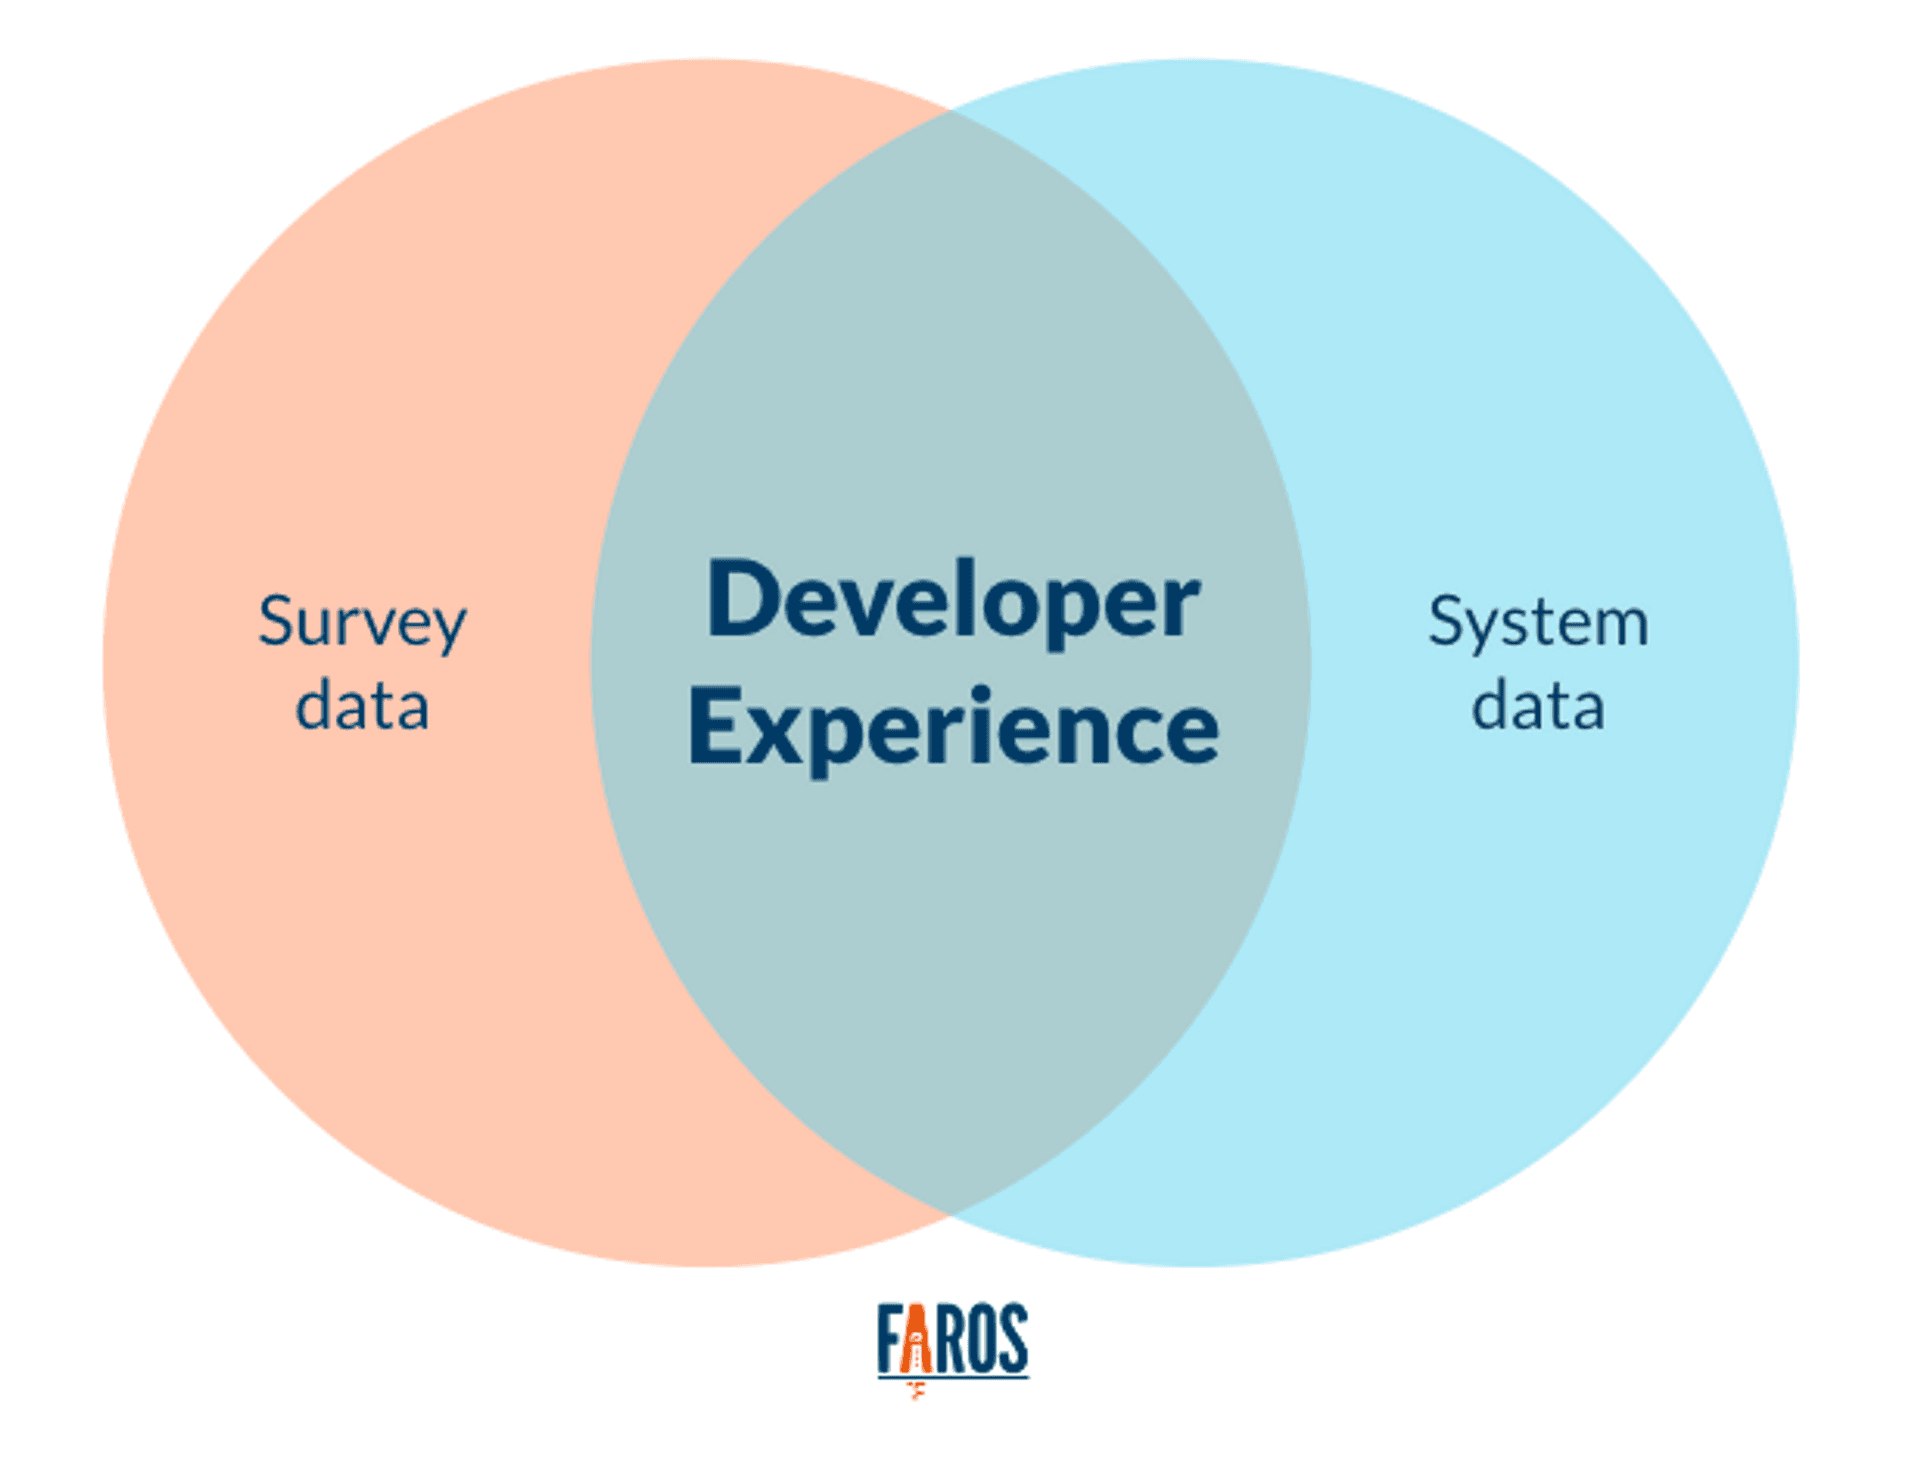 A venn diagram from Faros AI: Survey Ddata and System Data overlap, creating an overlapping section titled Developer Experience. 